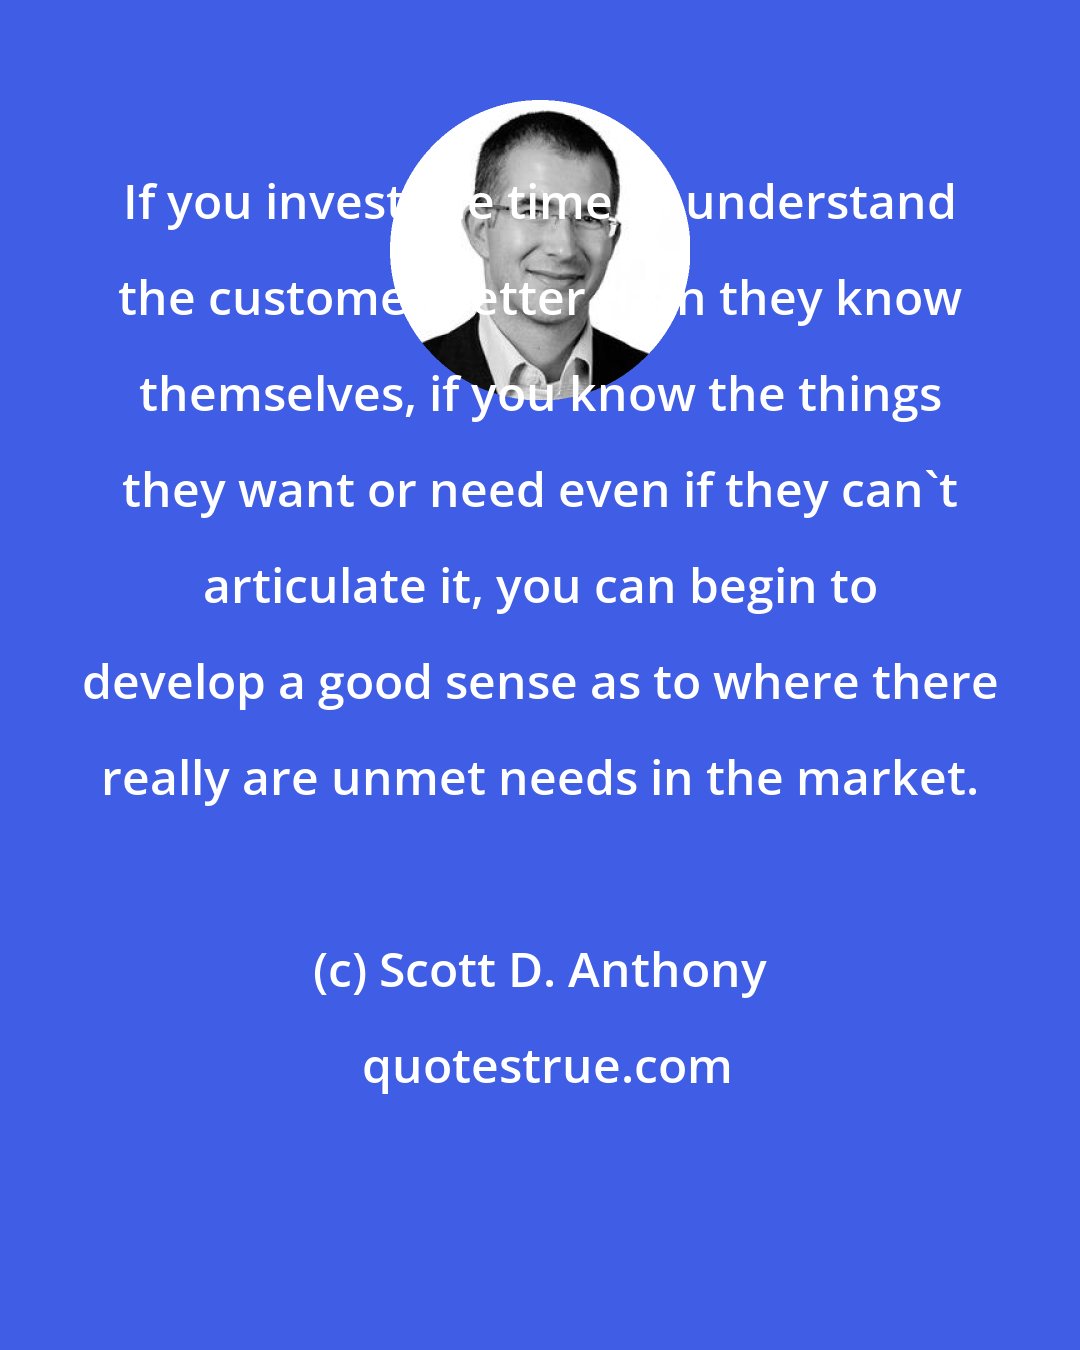 Scott D. Anthony: If you invest the time to understand the customer better than they know themselves, if you know the things they want or need even if they can't articulate it, you can begin to develop a good sense as to where there really are unmet needs in the market.